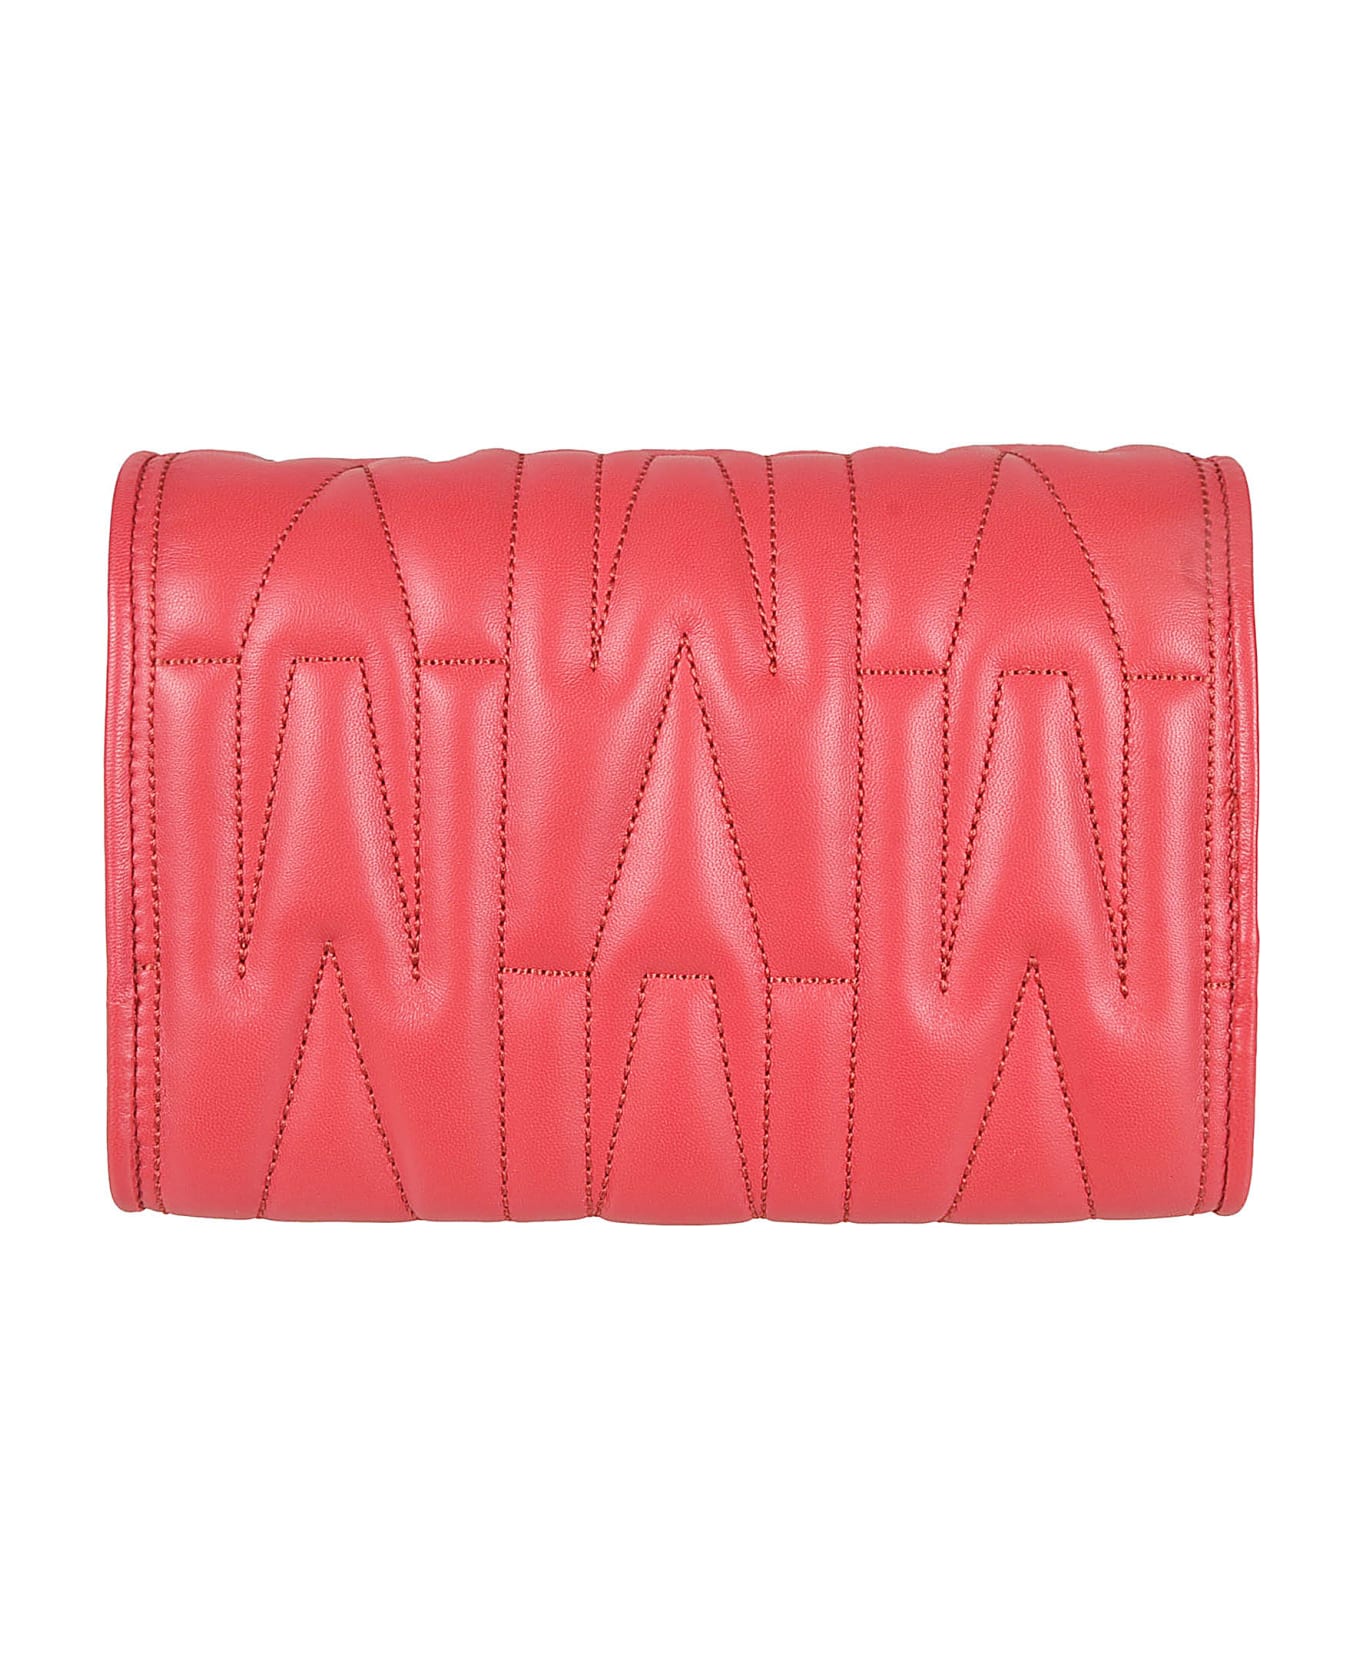 Moschino M Plaque Quilted Flap Chain Shoulder Bag - Red ショルダーバッグ